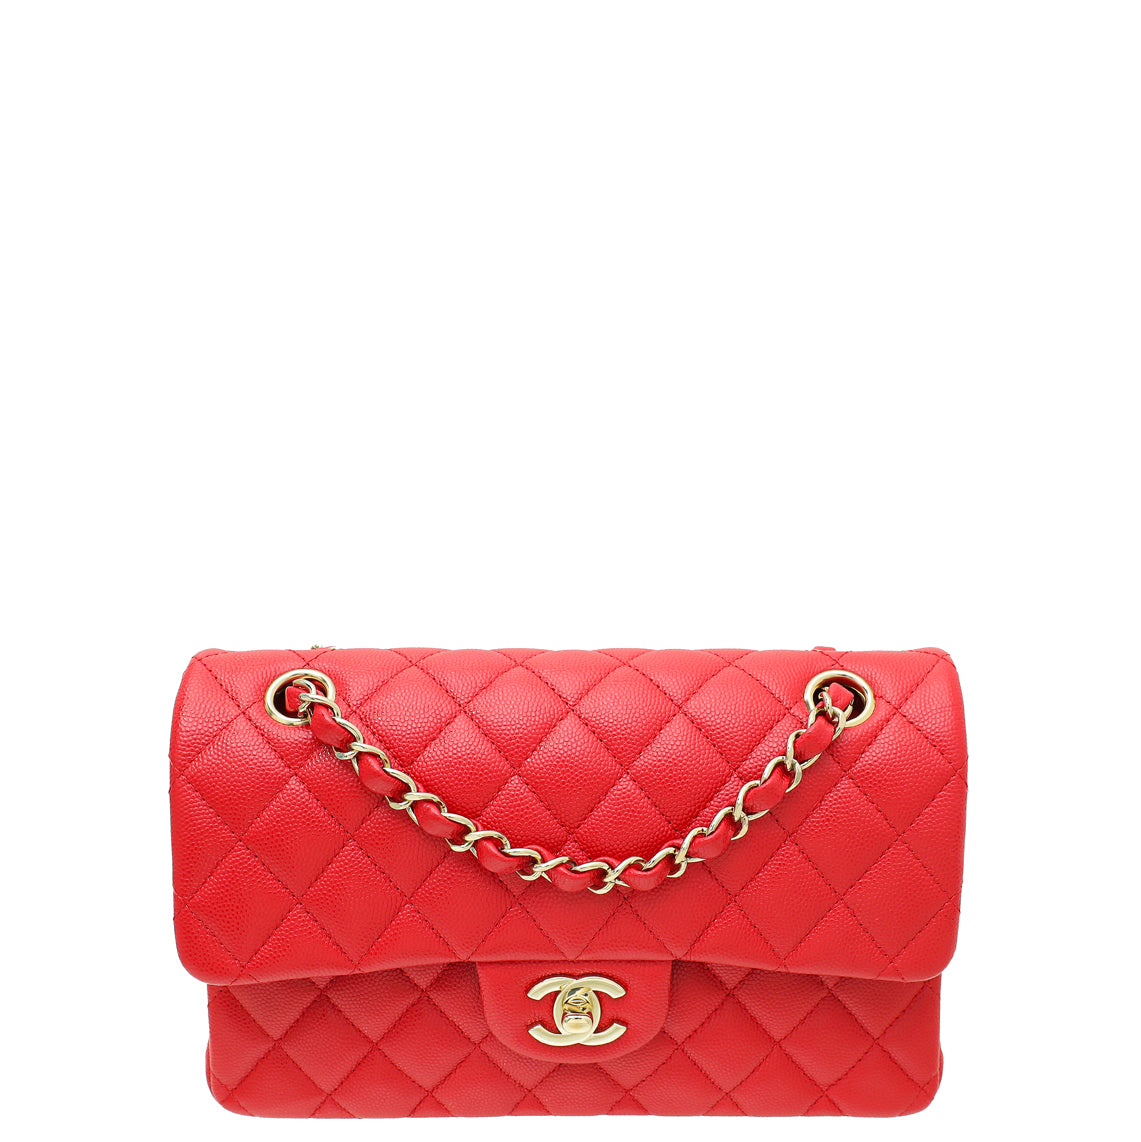 Chanel Red CC Classic Double Flap Small Bag